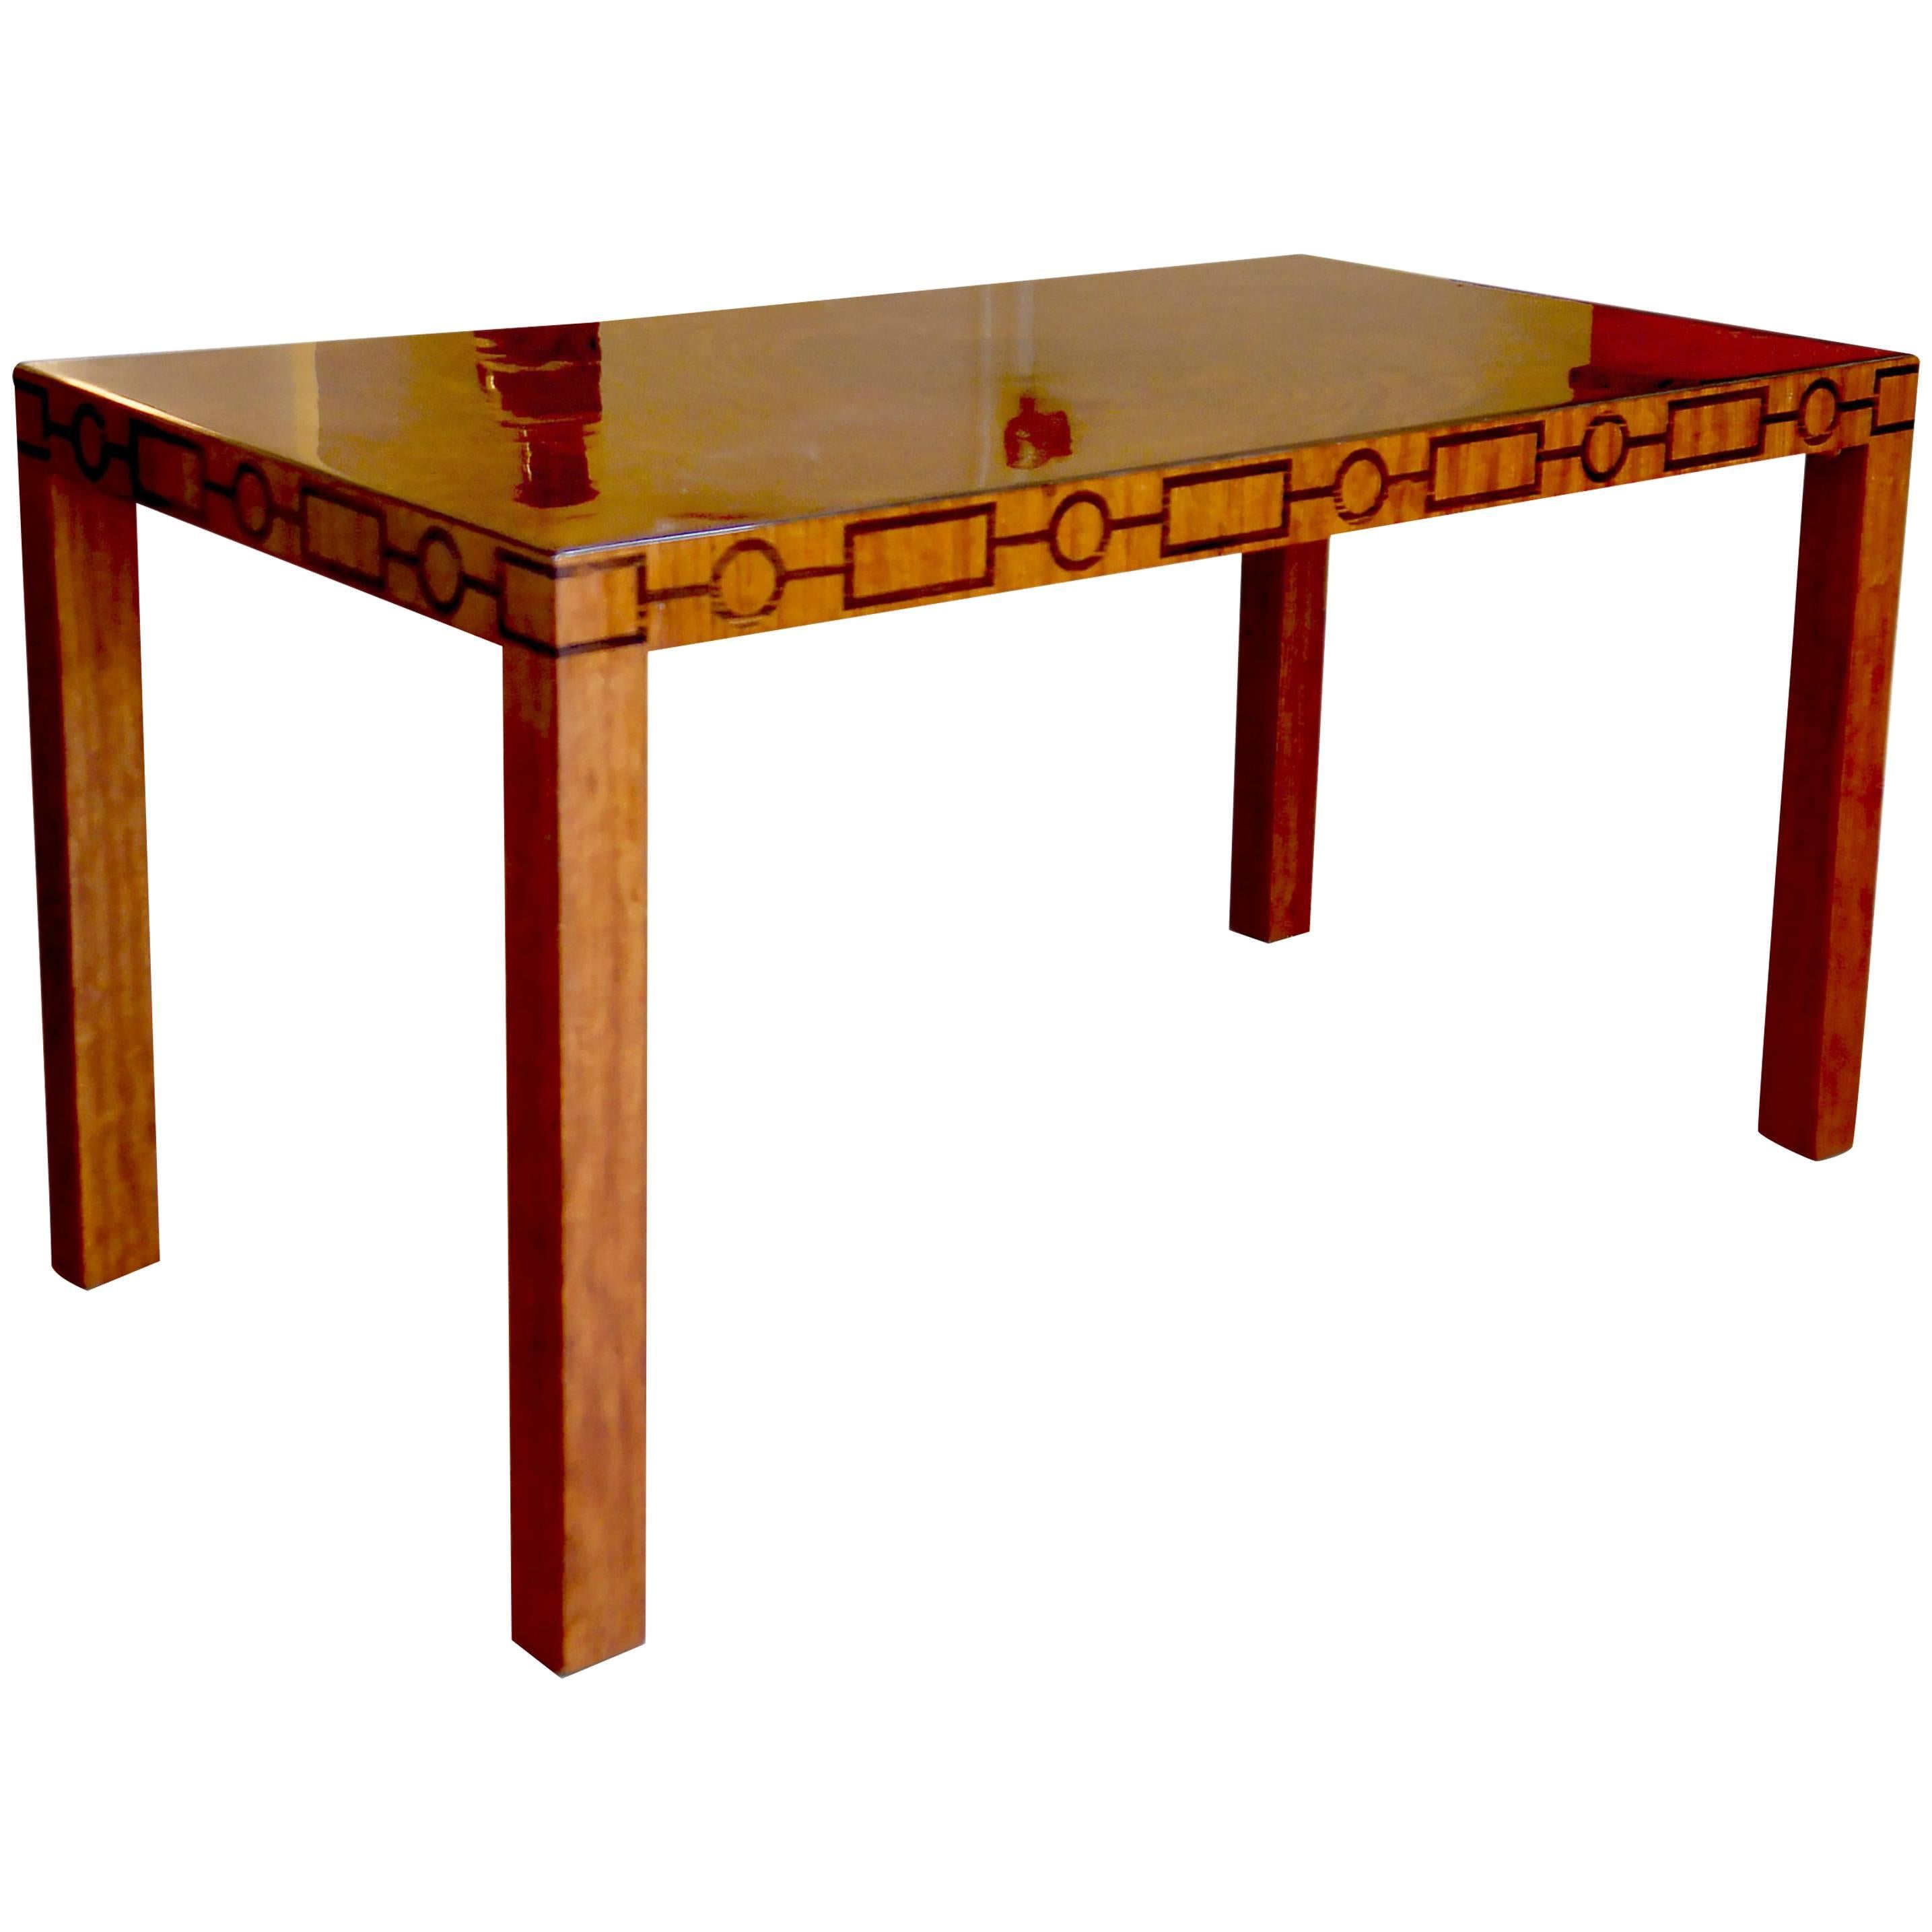 Very Fine Swedish Modern Classicism Coffee Table with Geometric Inlay Frieze For Sale